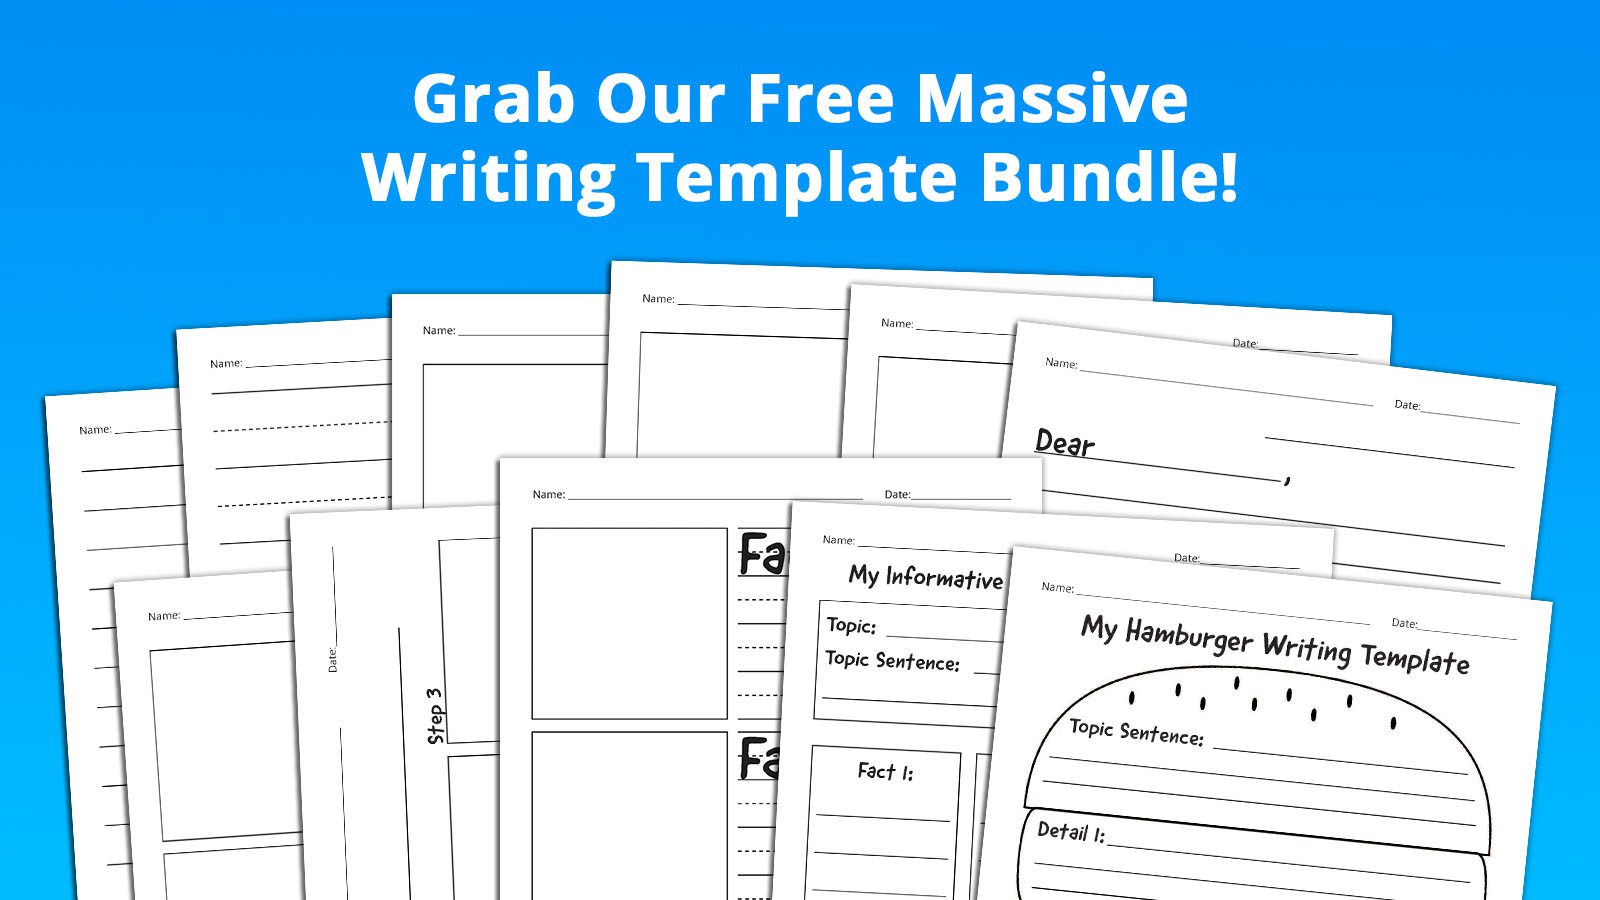 Grab our free massive writing template bundle!